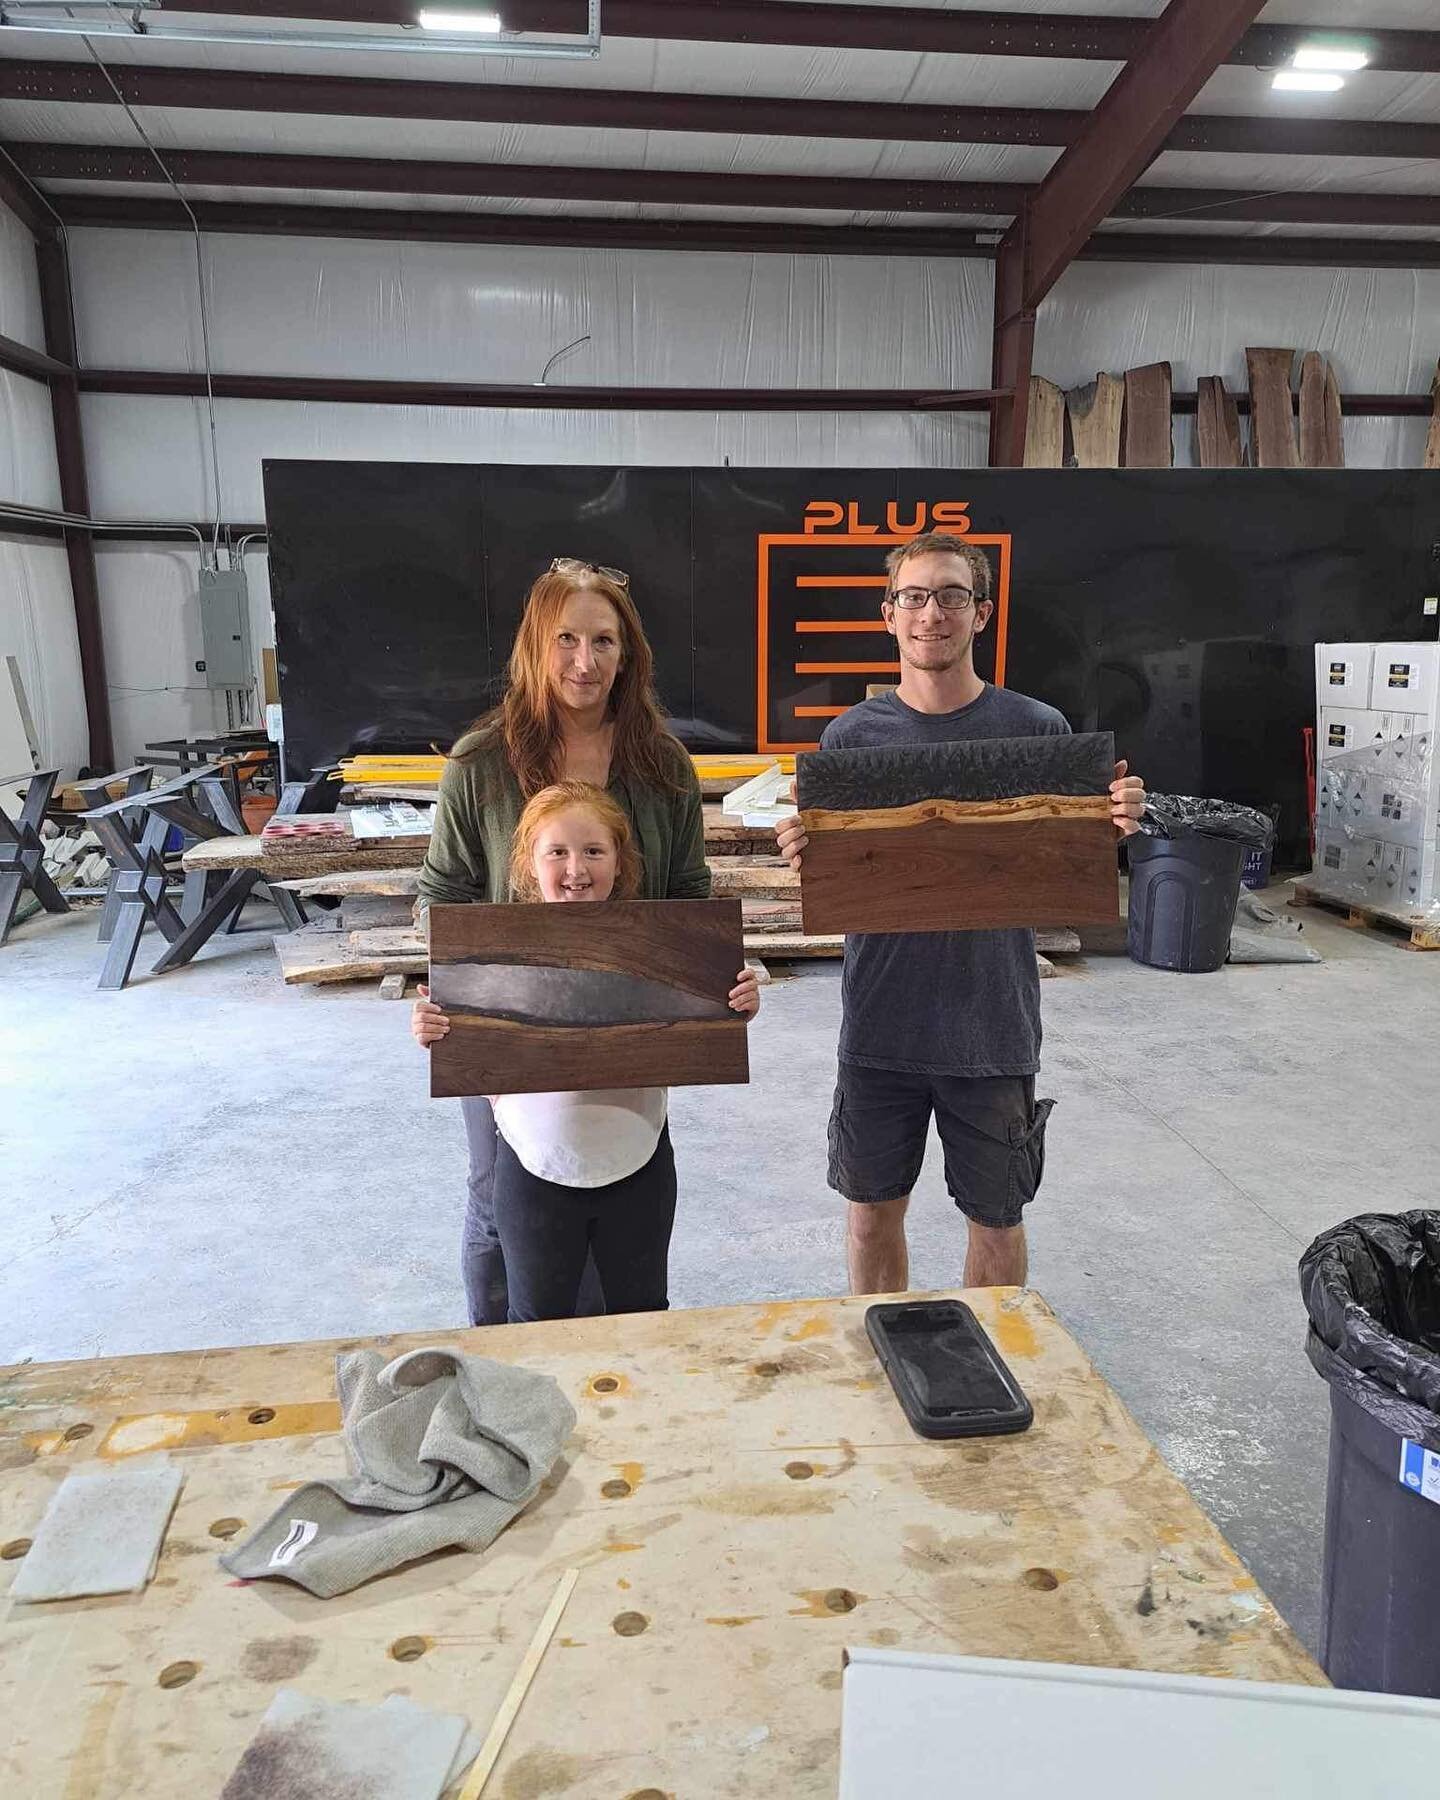 We had another successful Epoxy class over the weekend!
 We are offering @ollogginepoxy workshop classes and on your time and availability! Want to learn how to make epoxy serving trays? We will teach you all the tips and tricks to make them look pro